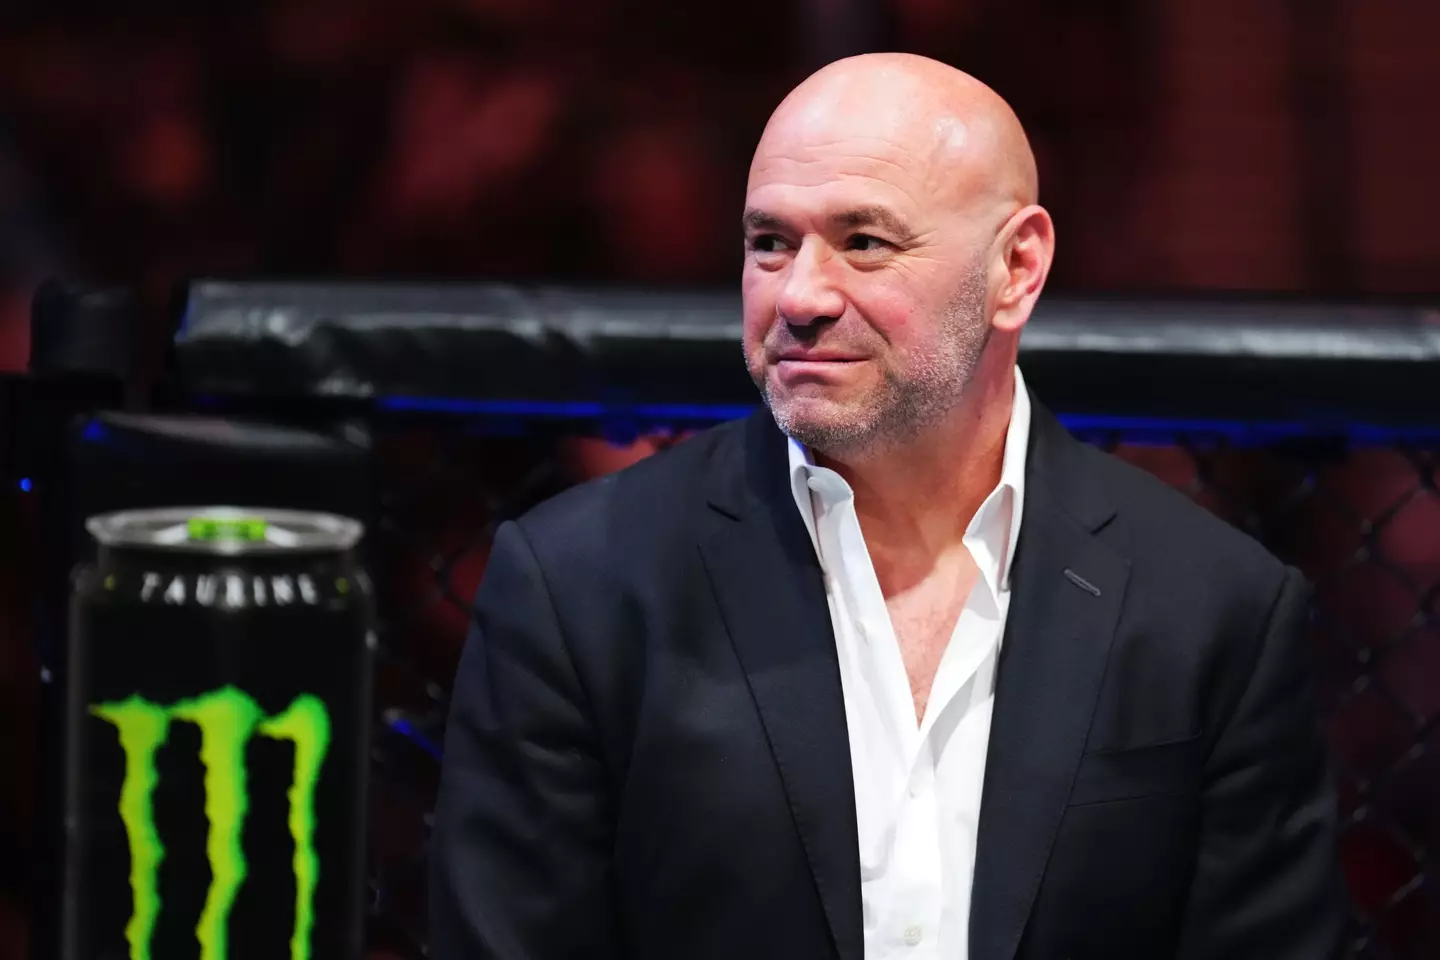 Dana White revealed both his parents passed away recently.